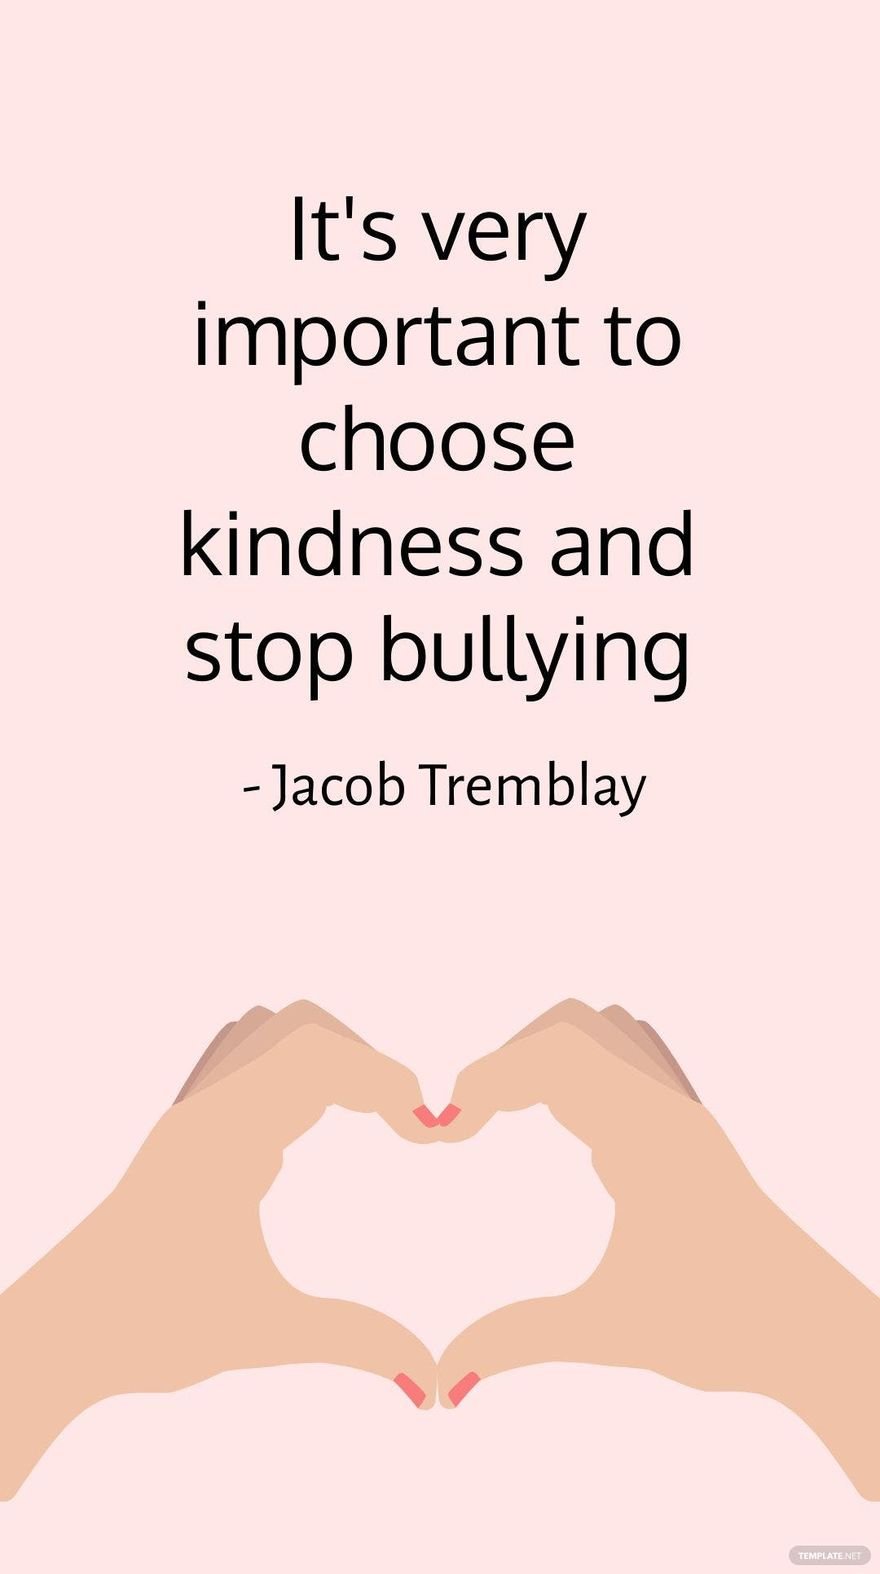 Jacob Tremblay - It's very important to choose kindness and stop bullying in JPG